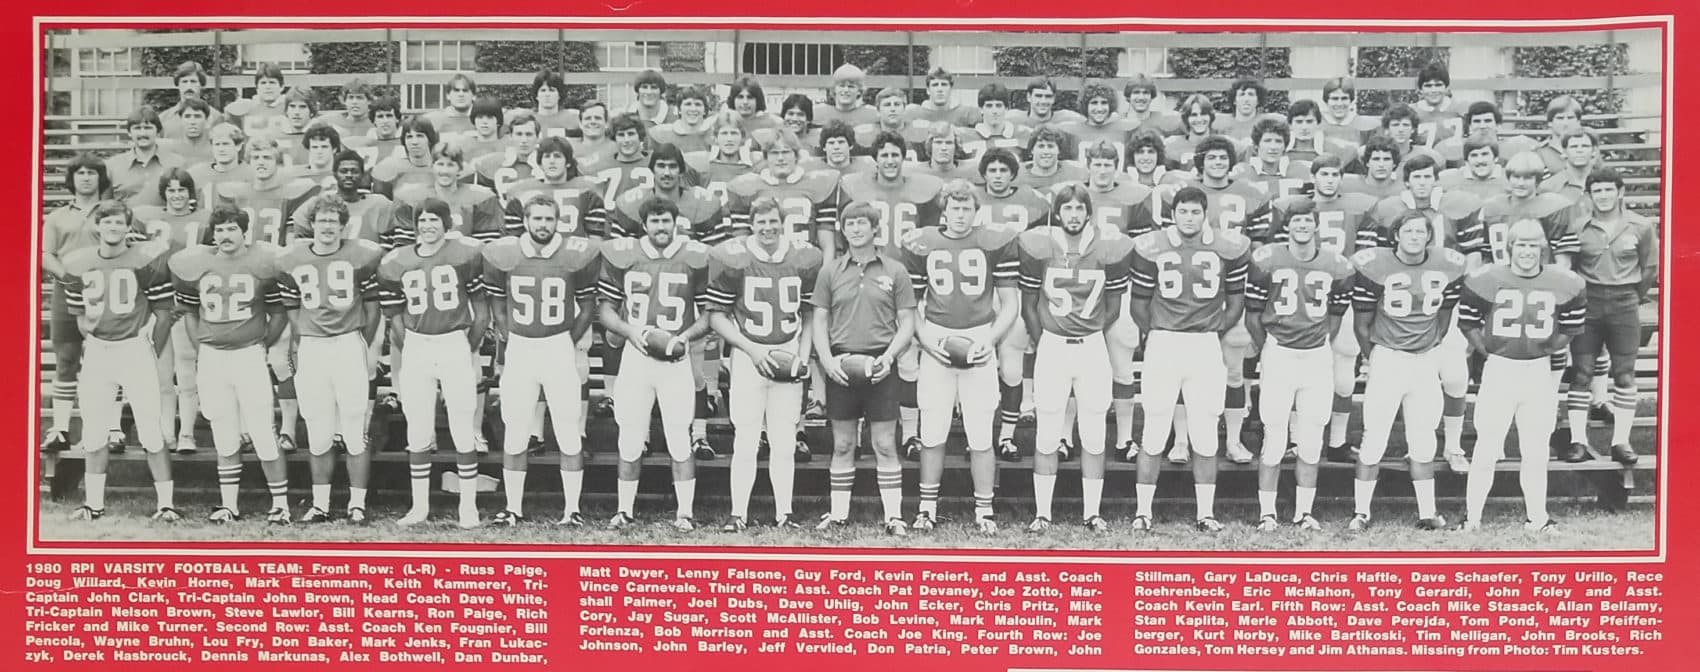 A photo of the 1980 RPI football team, which does not include John Wilson